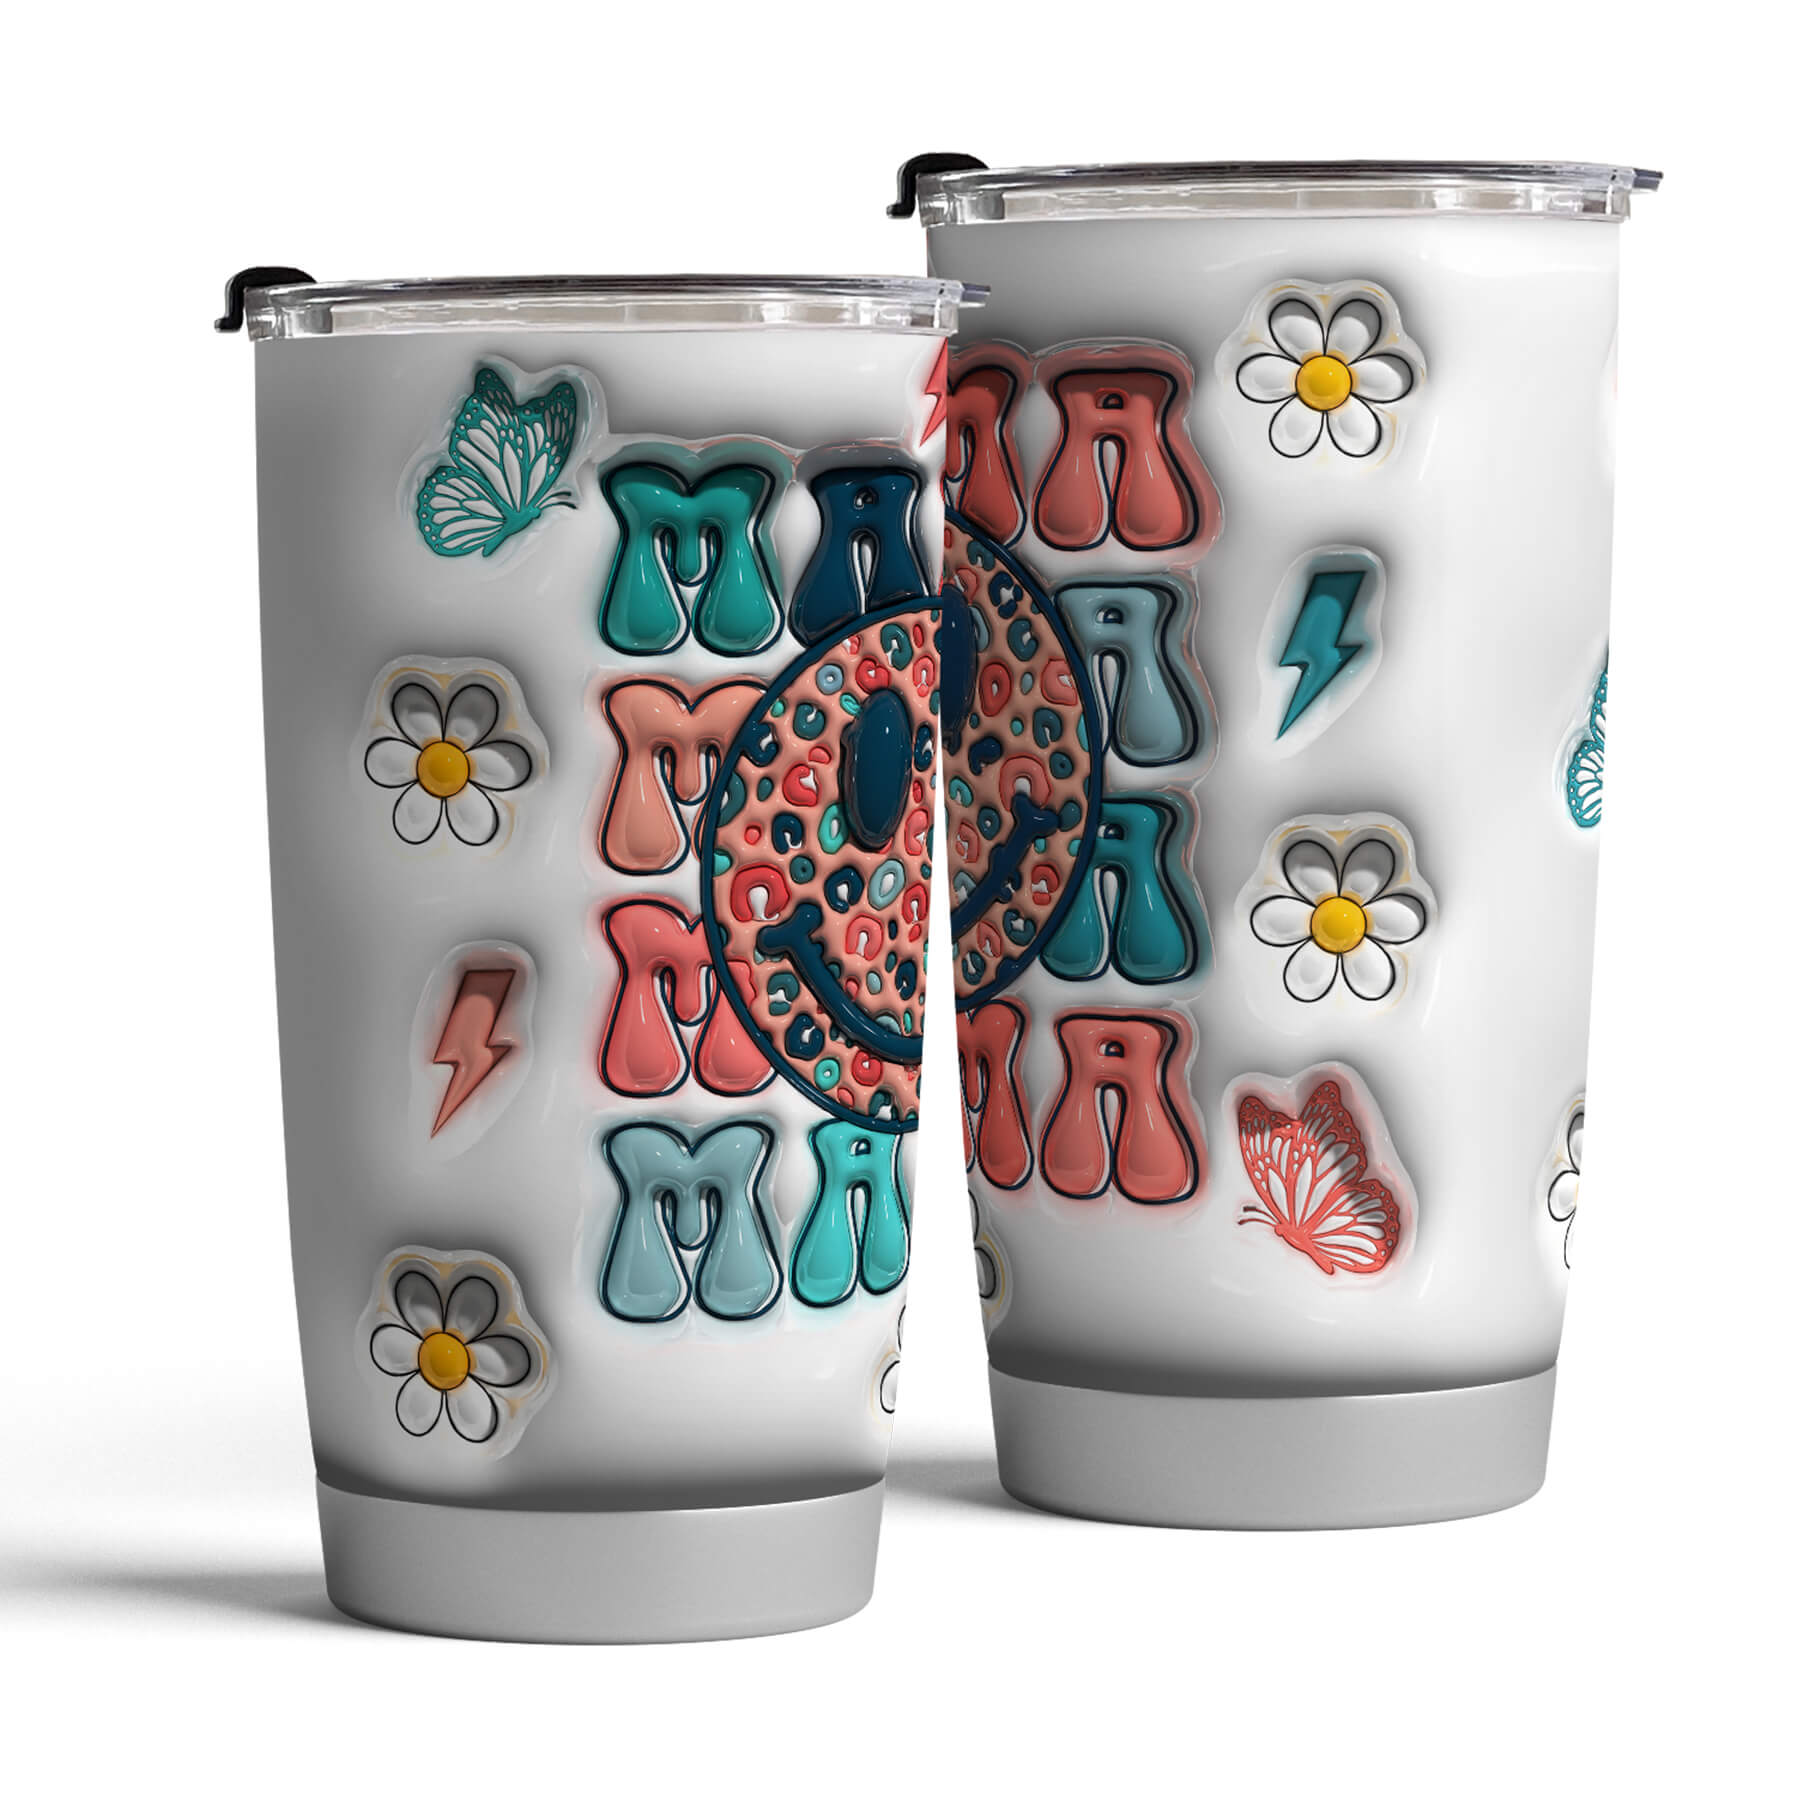 Beloved Tumbler Collection: For Moms, Stepmoms, Mothers-in-Law, and Grandmas